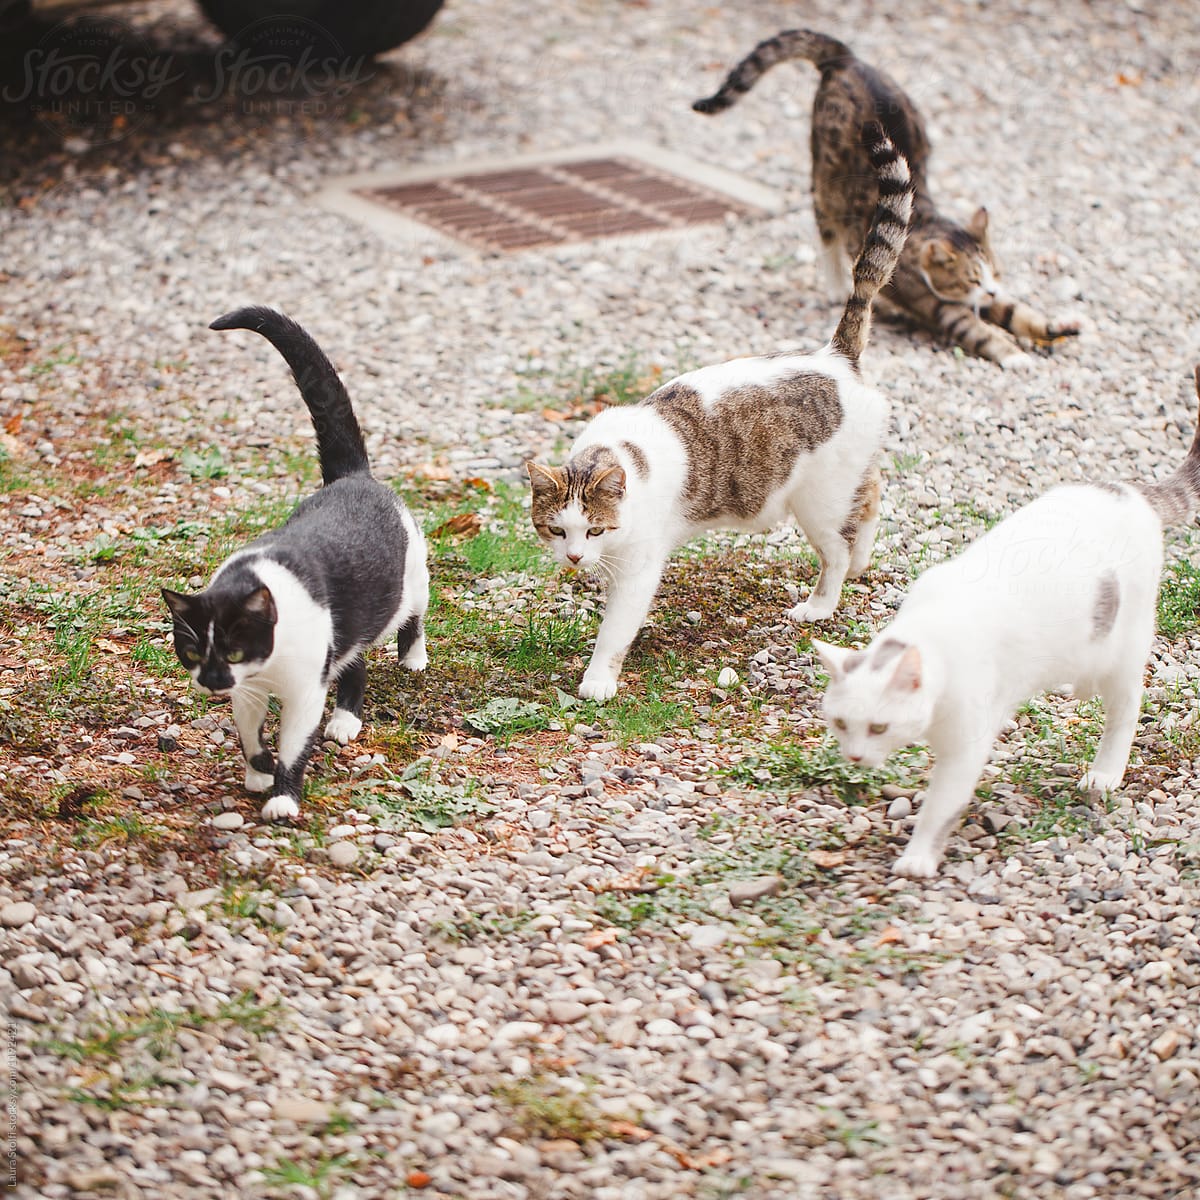 Group of cats walking together in garden